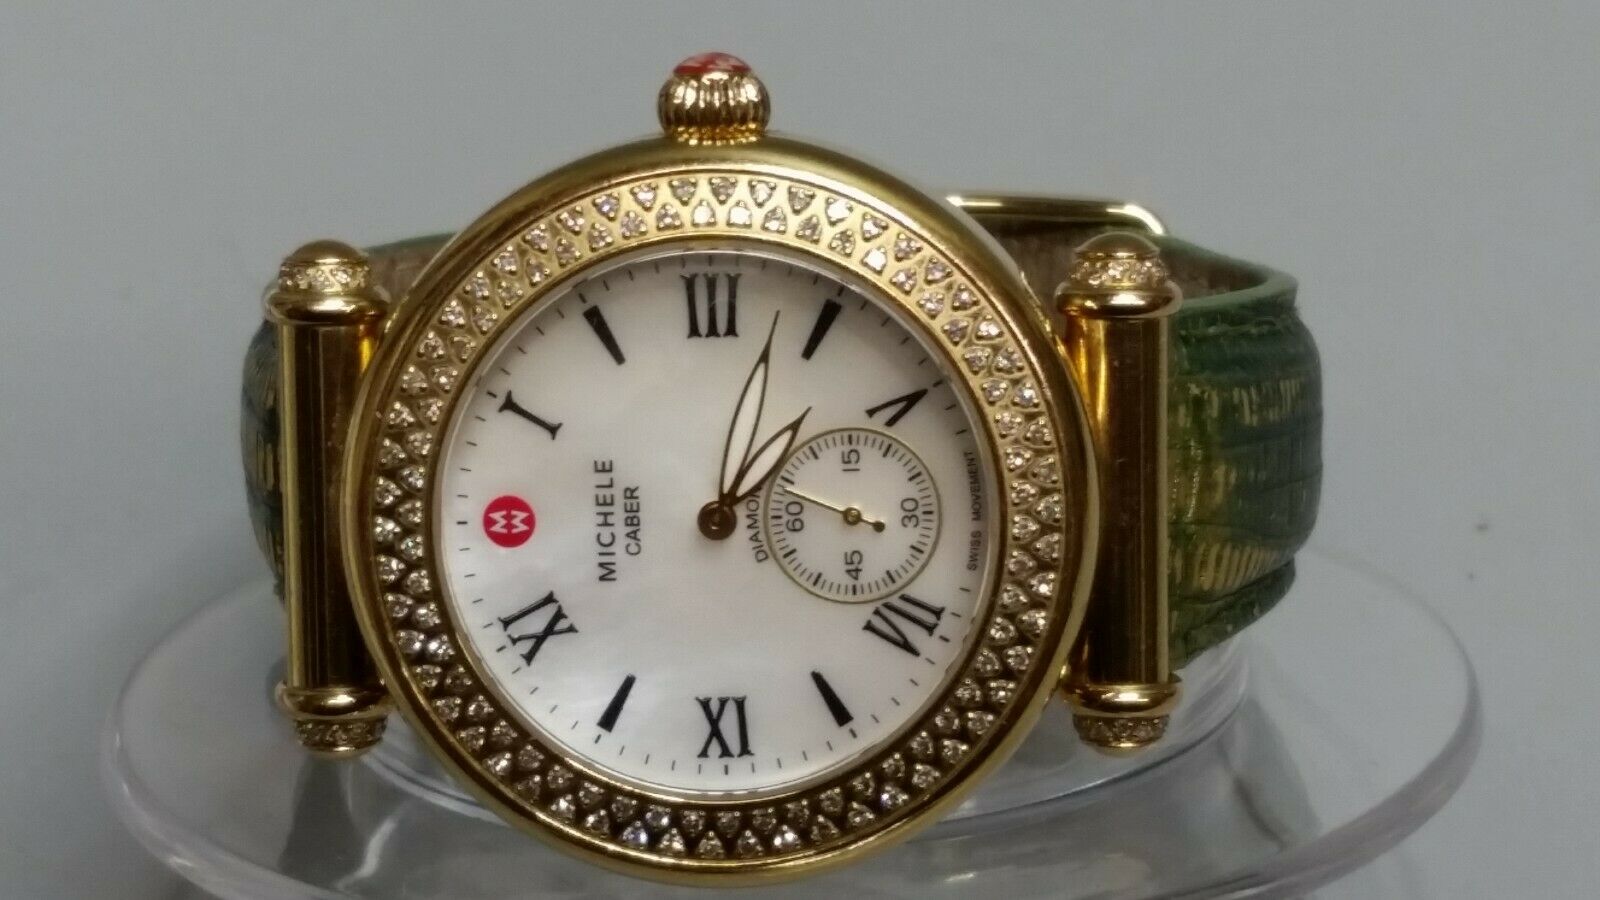 Michele Caber Gold-tone Stainless Steel .58cts Diamonds Swiss Watch Mw16a0b1025